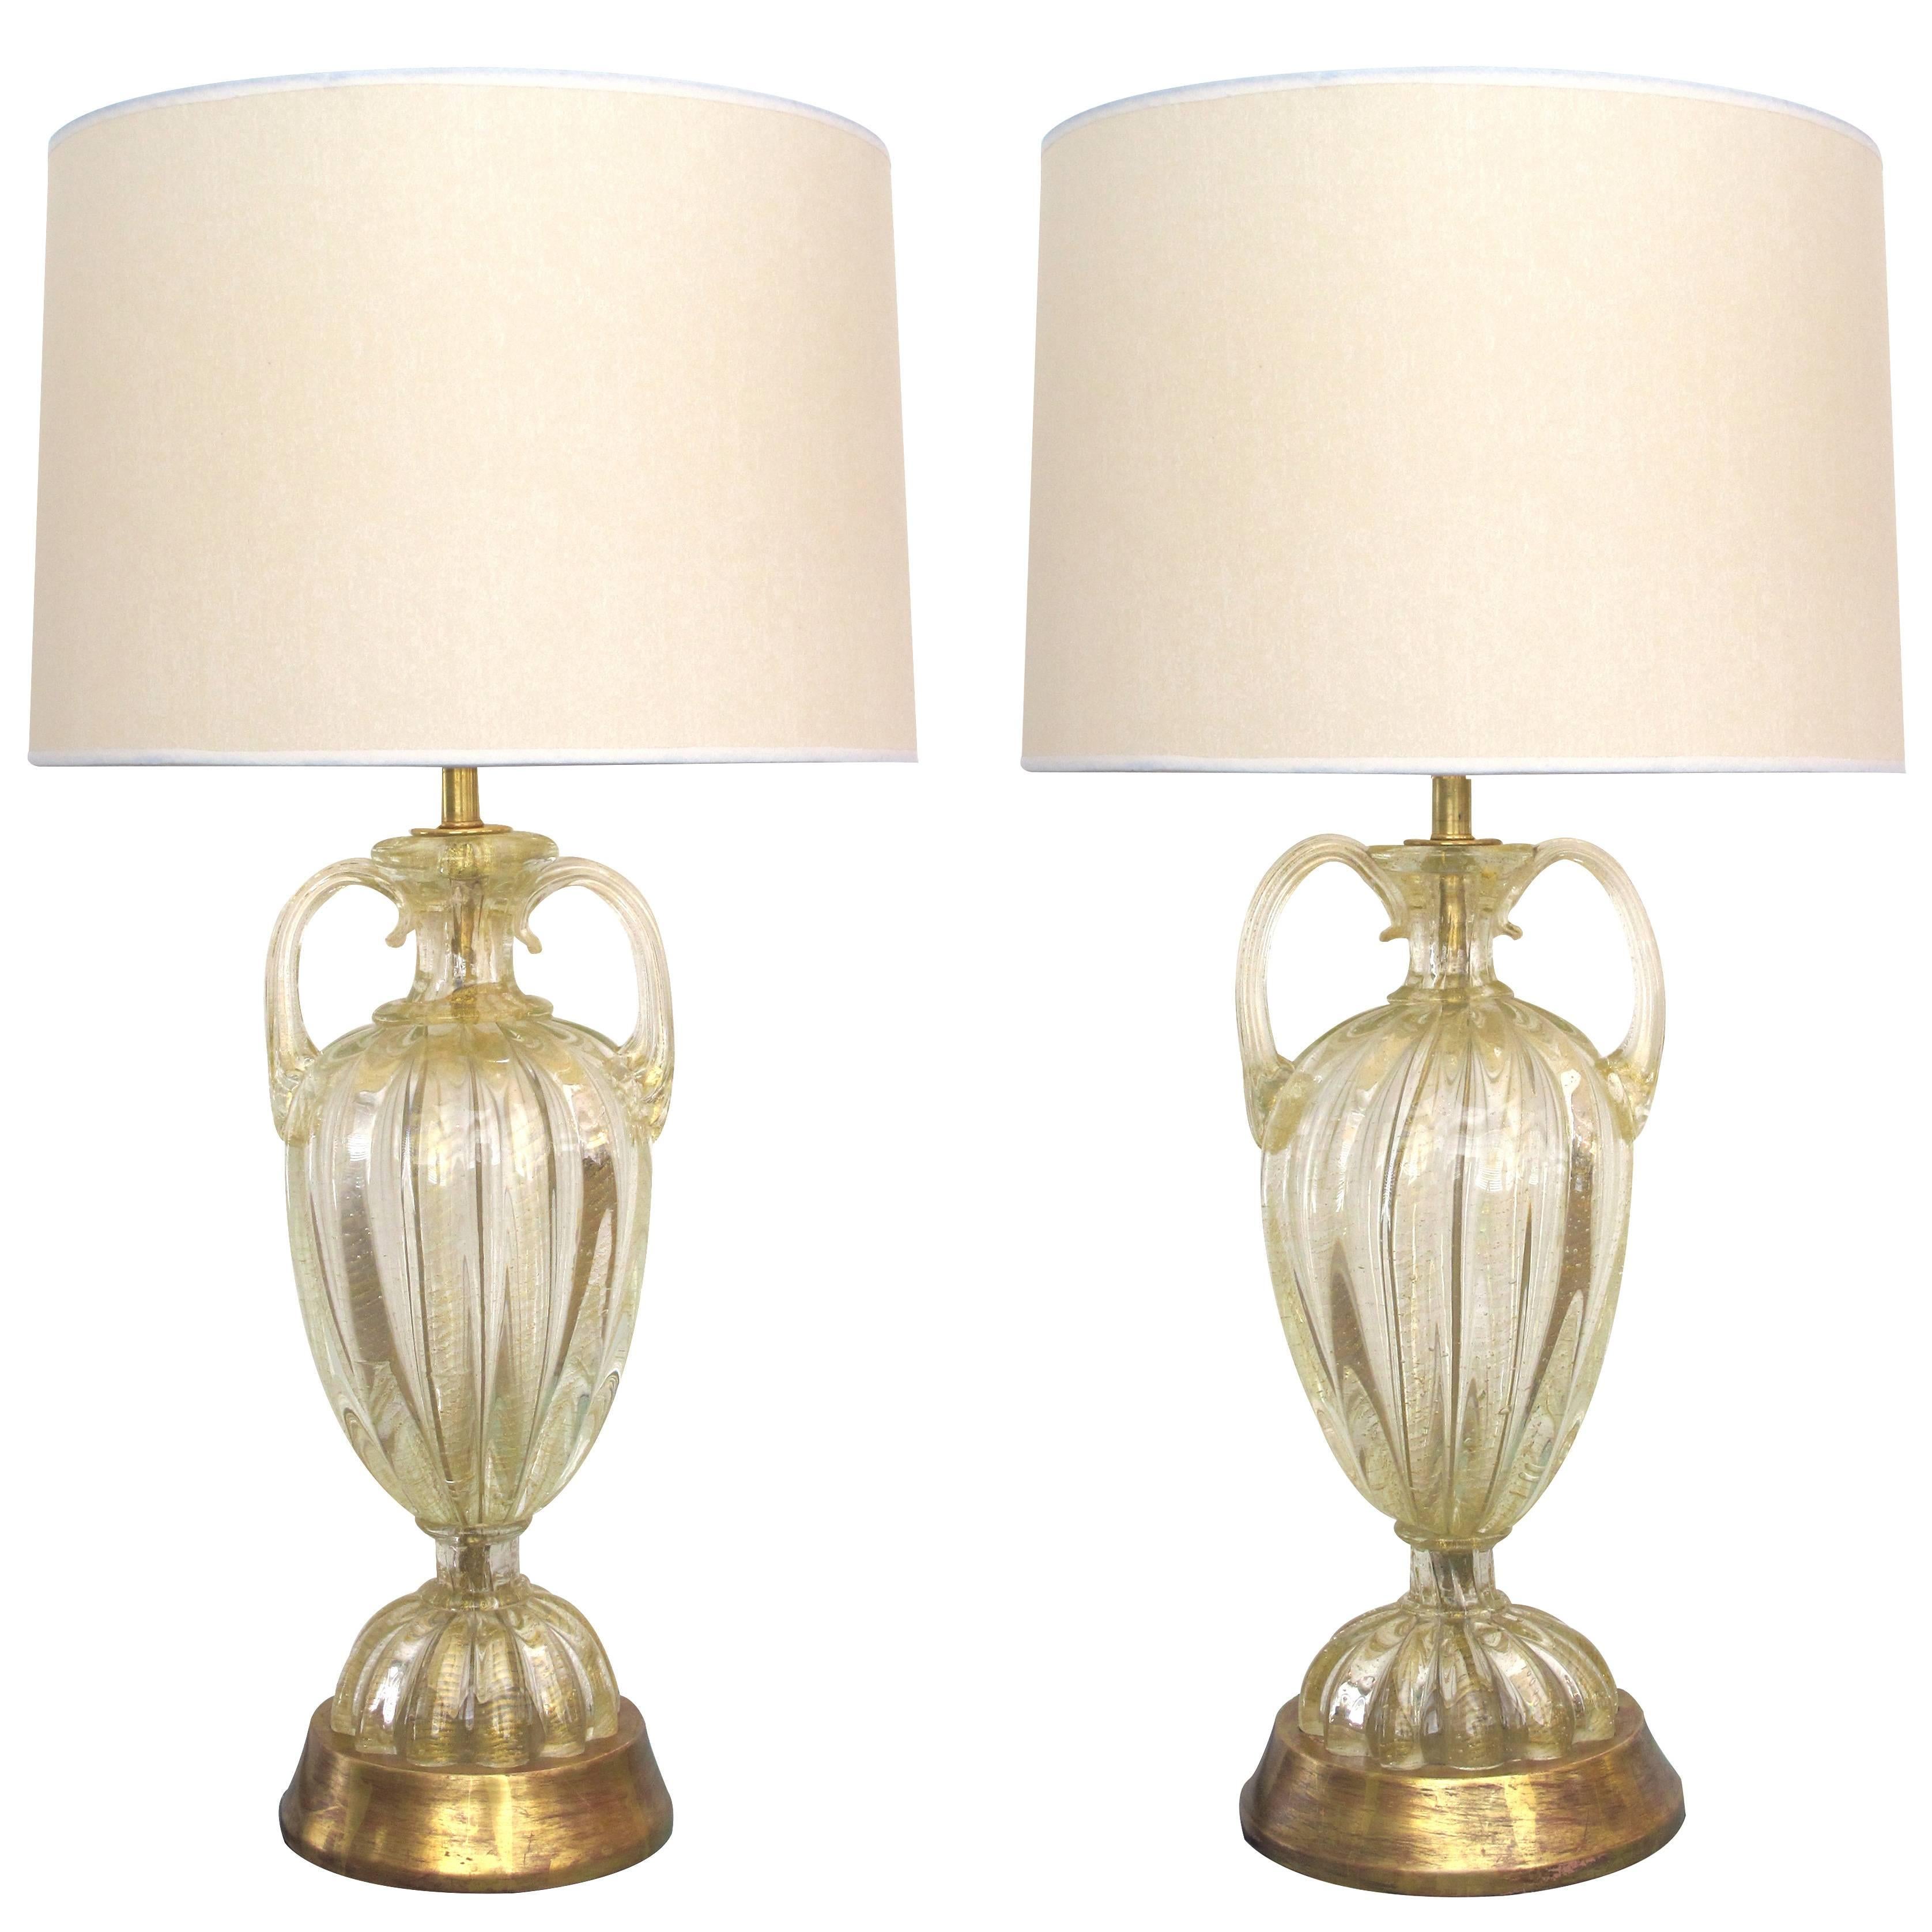 Pair of Murano Gold Aventurine Art Glass Urn-Form Lamps by Barovier & Toso